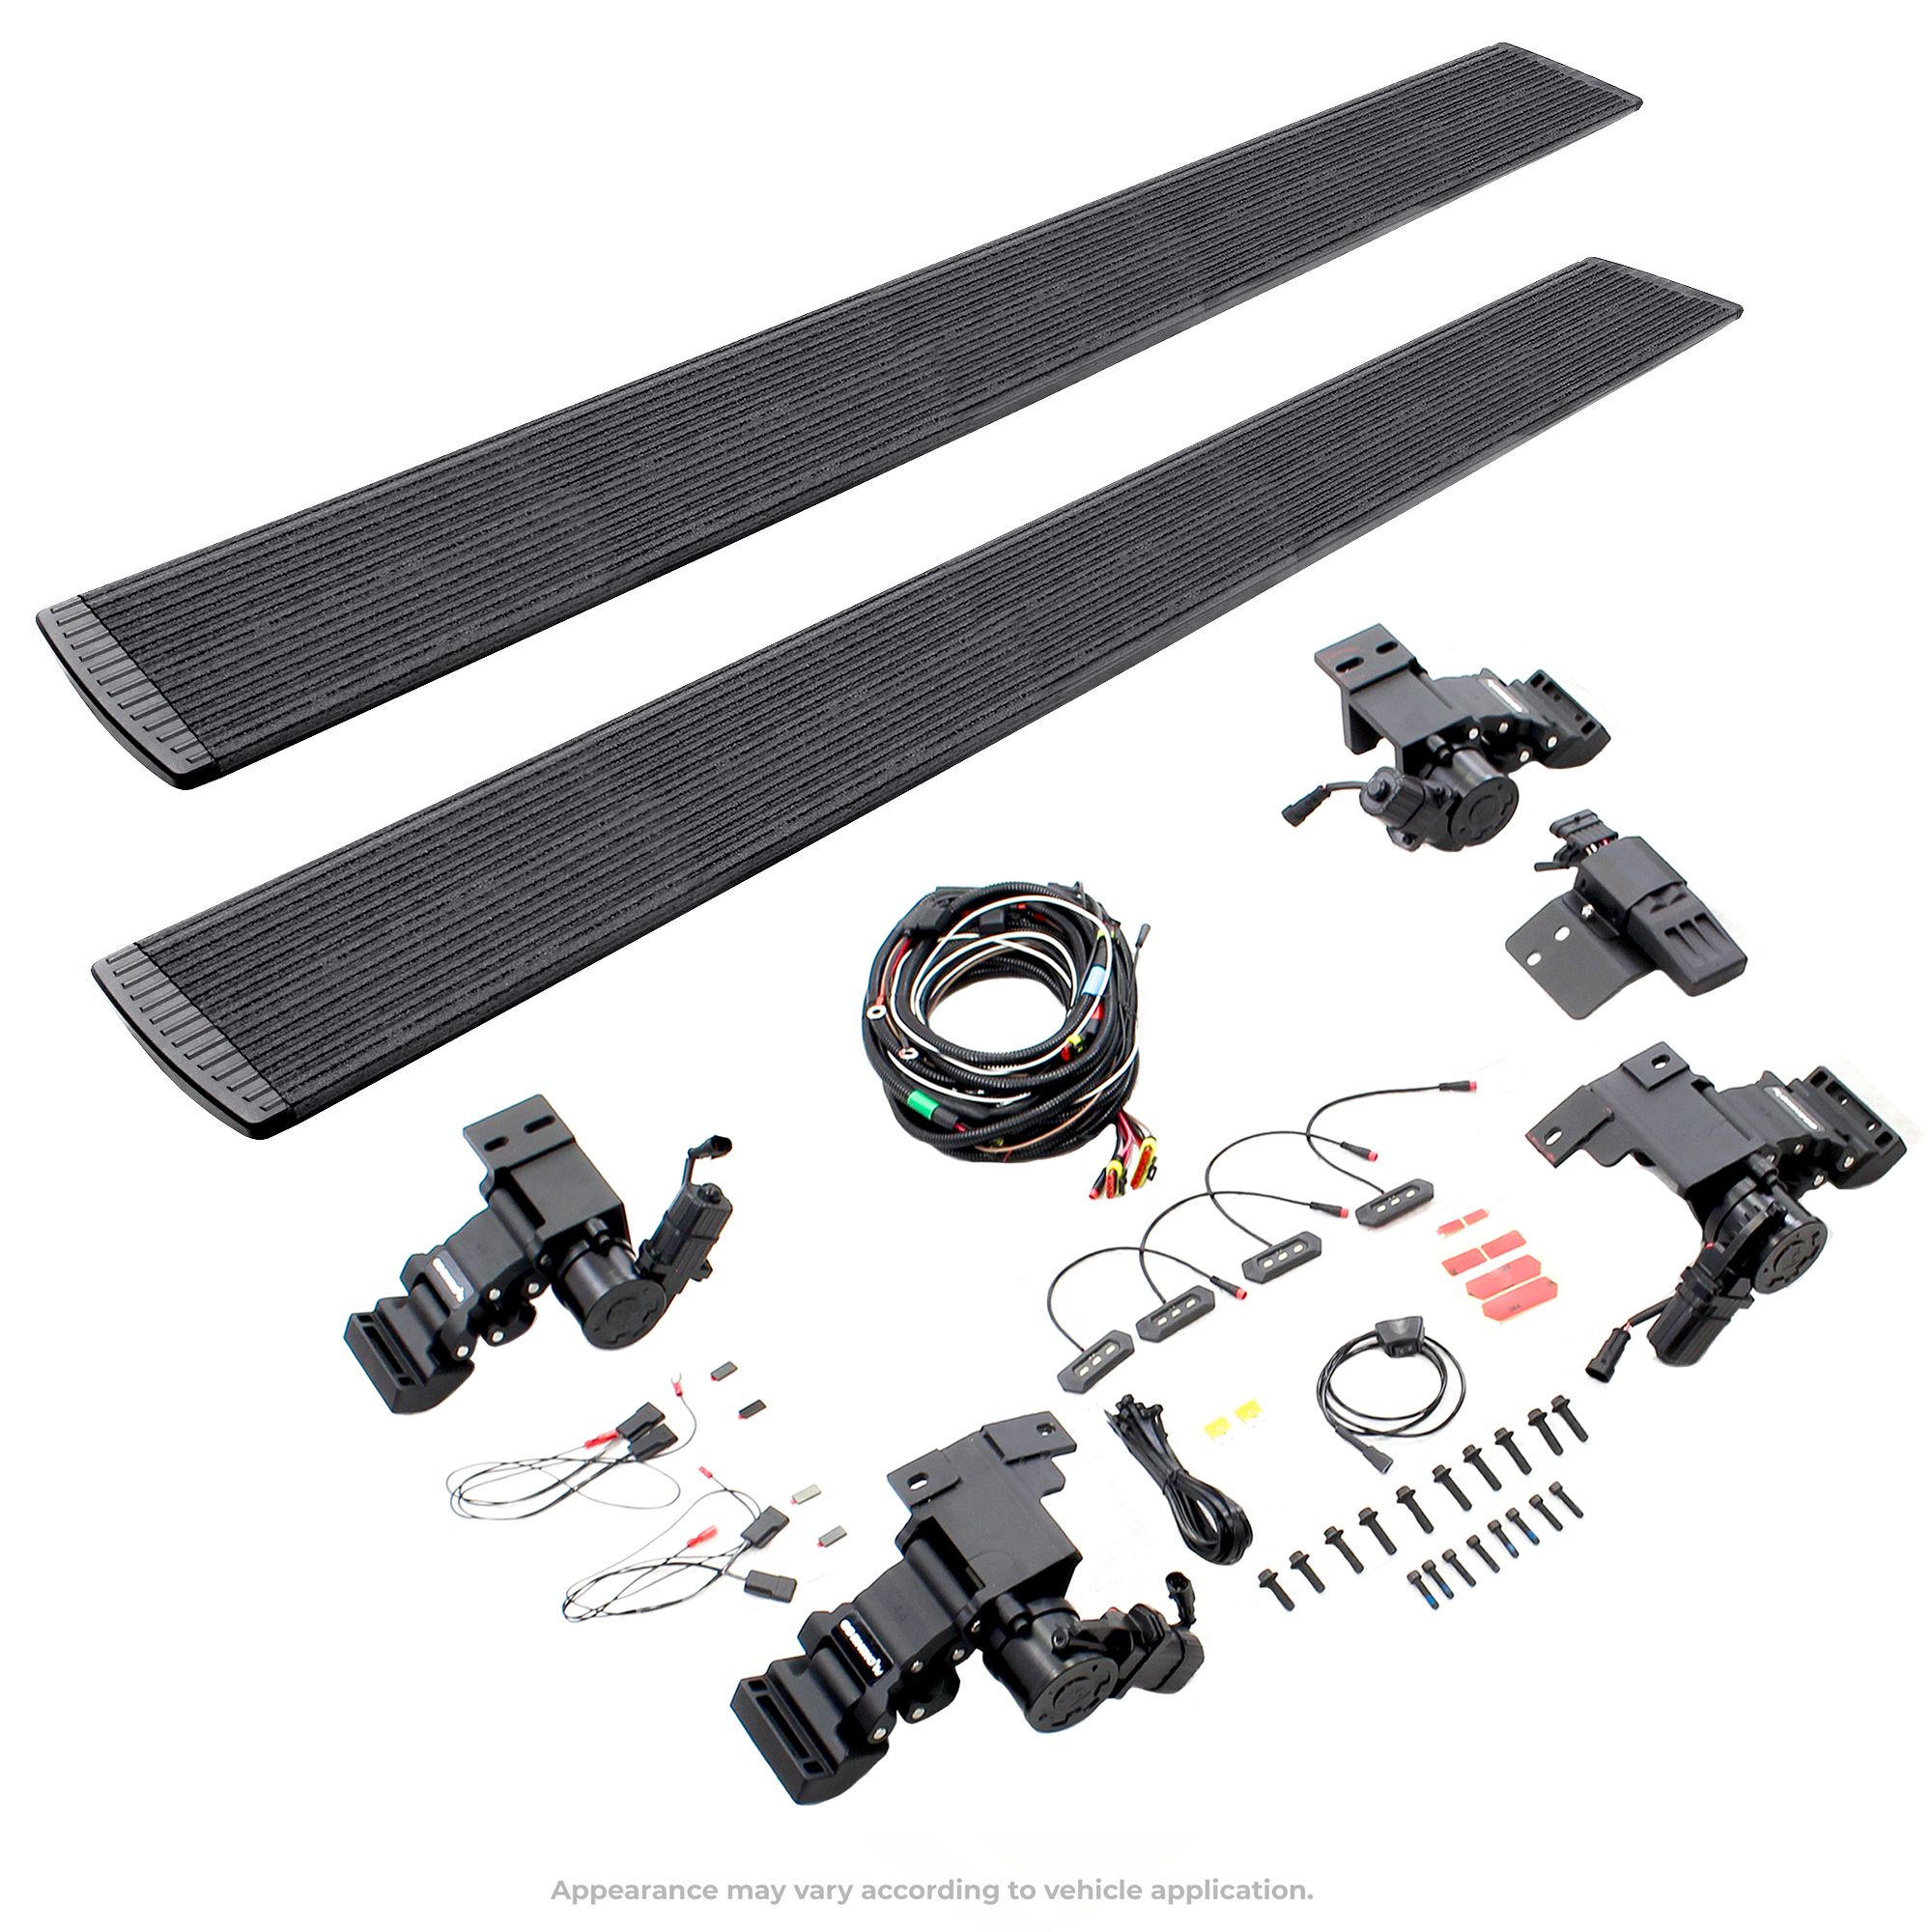 Go Rhino 20404880T - E1 Electric Running Boards With Mounting Brackets - Protective Bedliner Coating